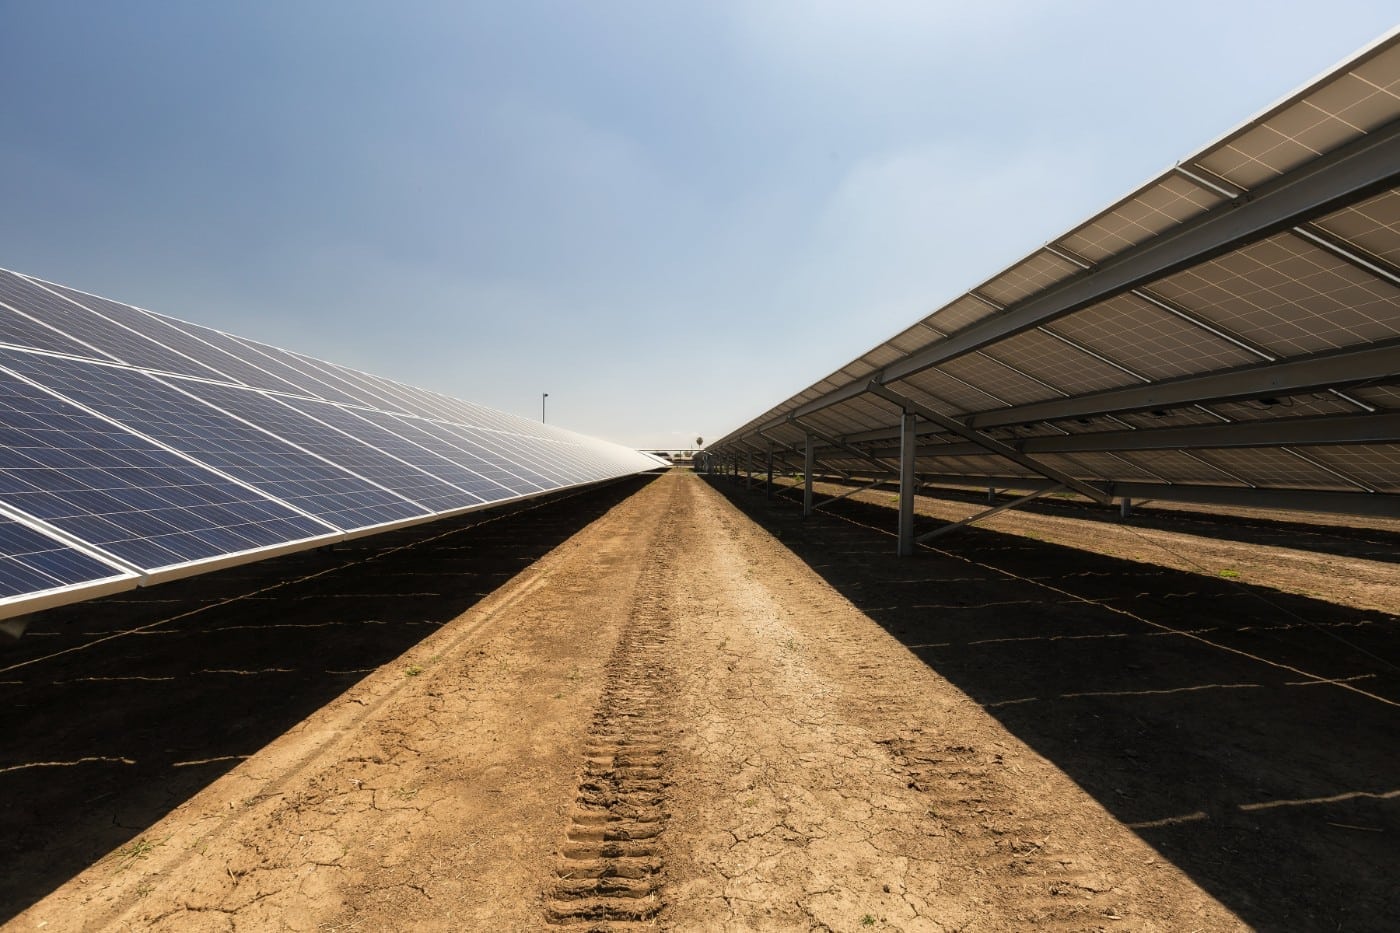 Dirt path between two long rows of ground-mounted solar panels and blue sky at the Joe Simoes dairy farm in Tipton, California.